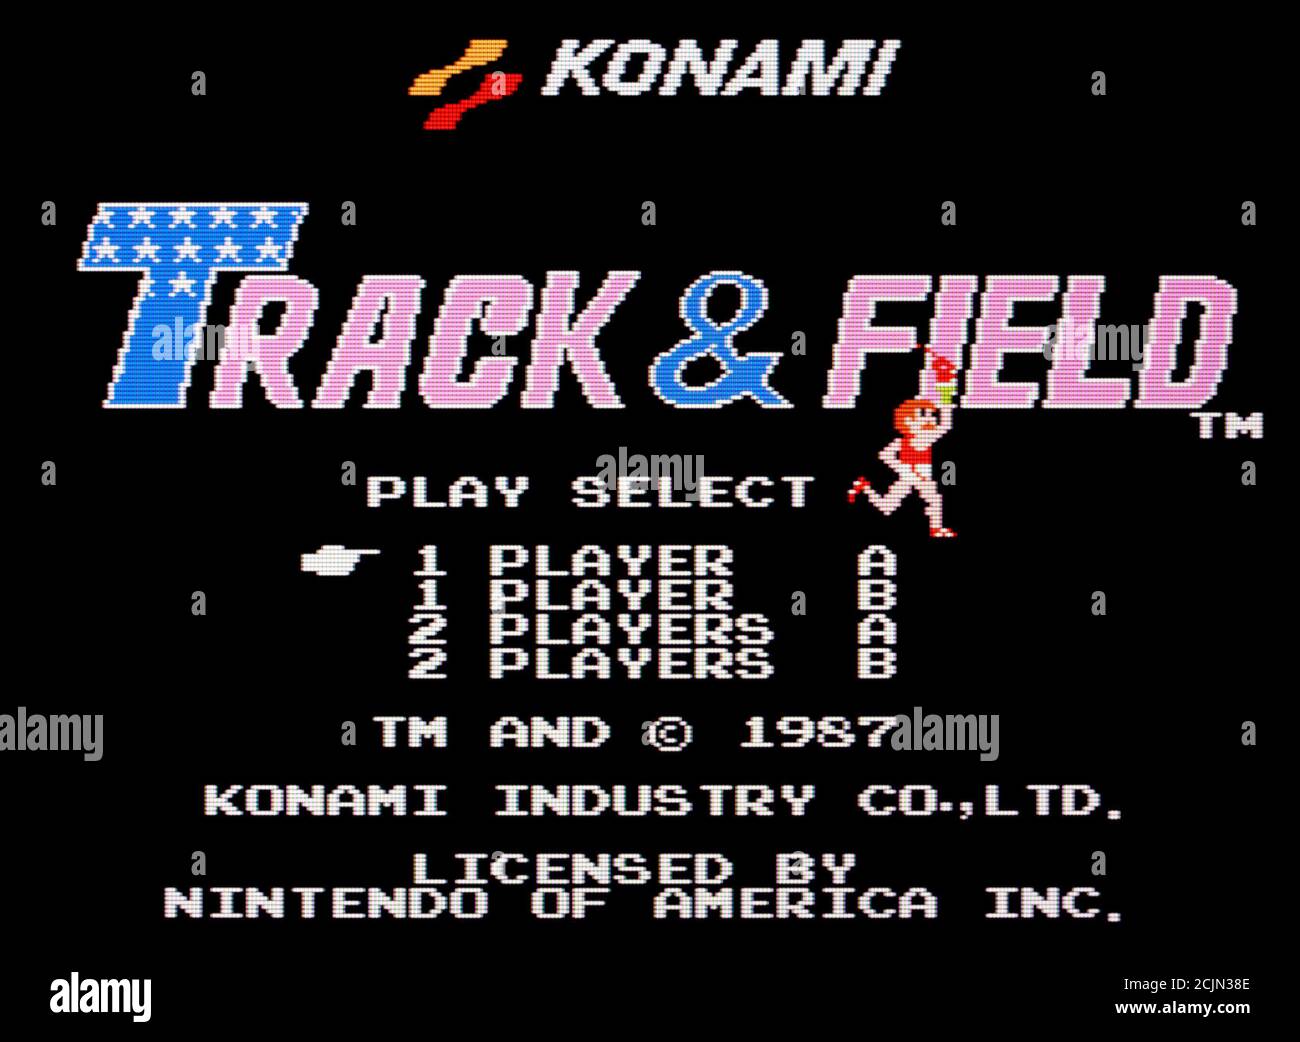 Track & Field - Nintendo Entertainment System - NES Videogame - Editorial use only Stock Photo